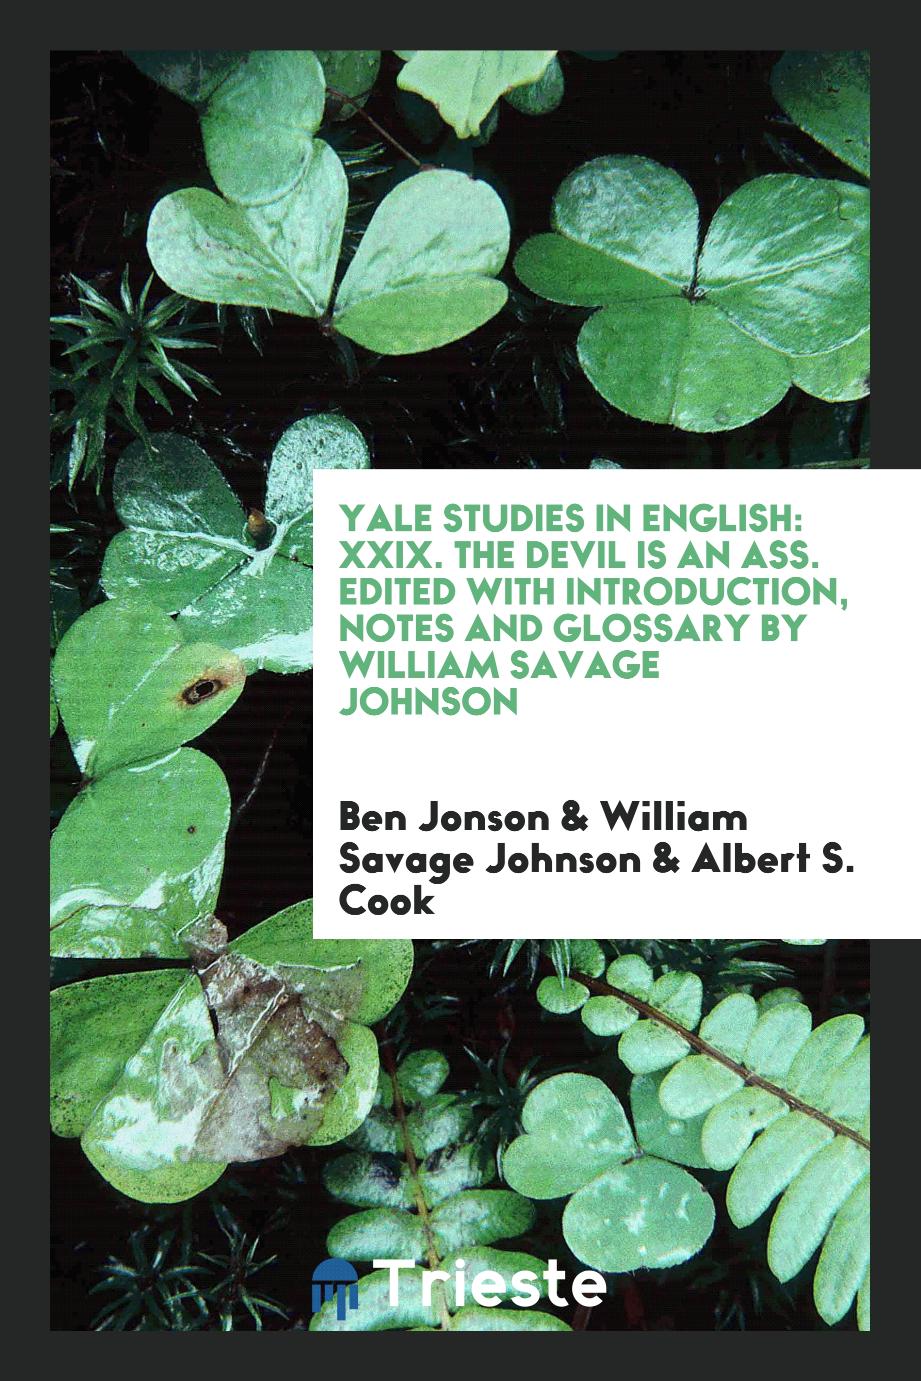 Yale Studies in English: XXIX. The Devil Is an Ass. Edited with Introduction, Notes and Glossary by William Savage Johnson